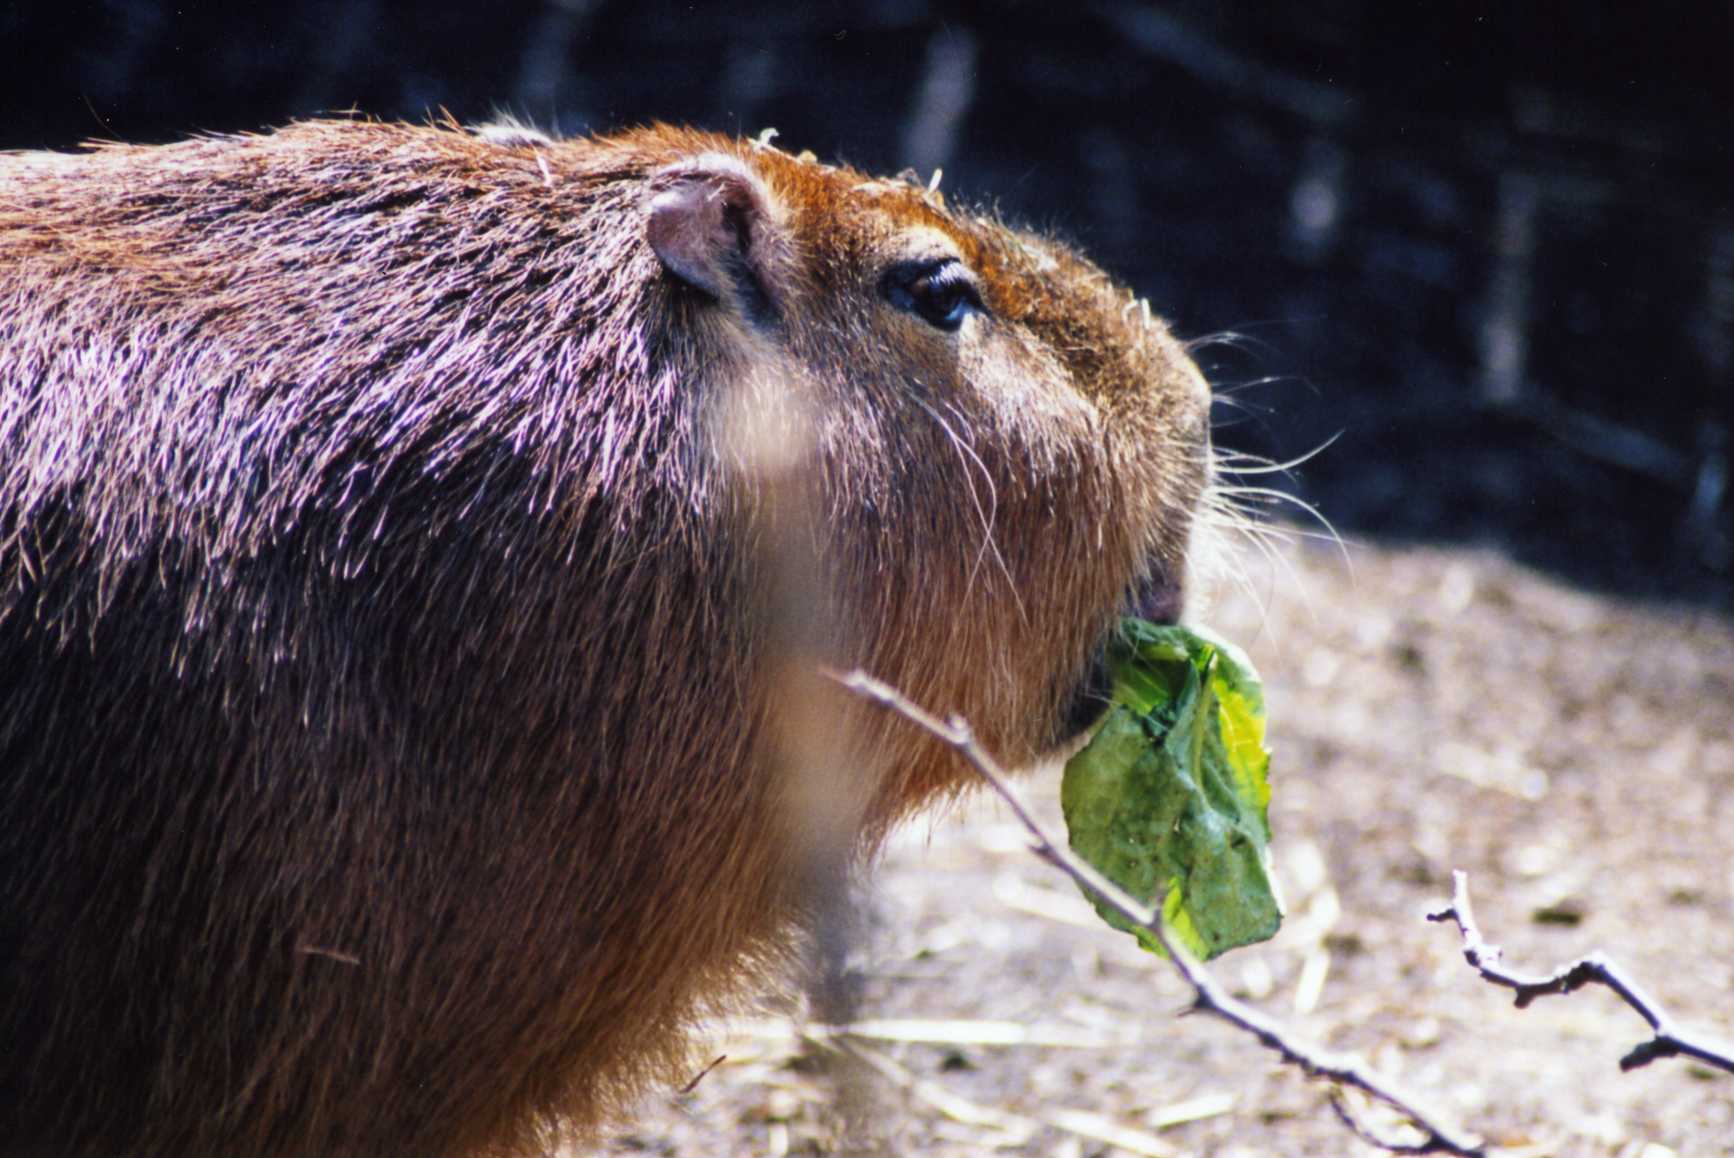 a close up of a capy animal eating leaves